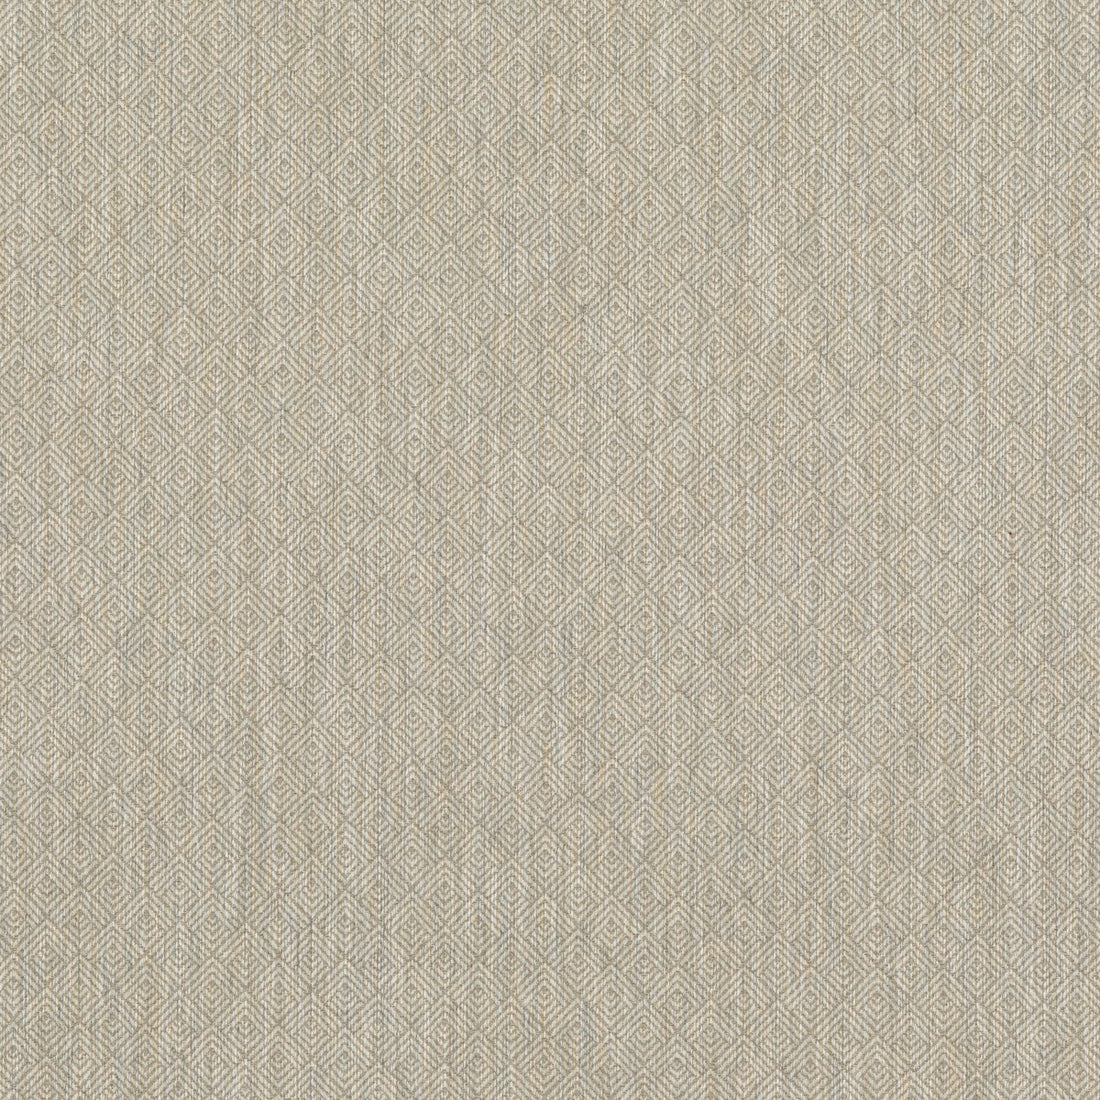 Clevedon fabric in mineral color - pattern BF10870.705.0 - by G P &amp; J Baker in the Essential Colours II collection